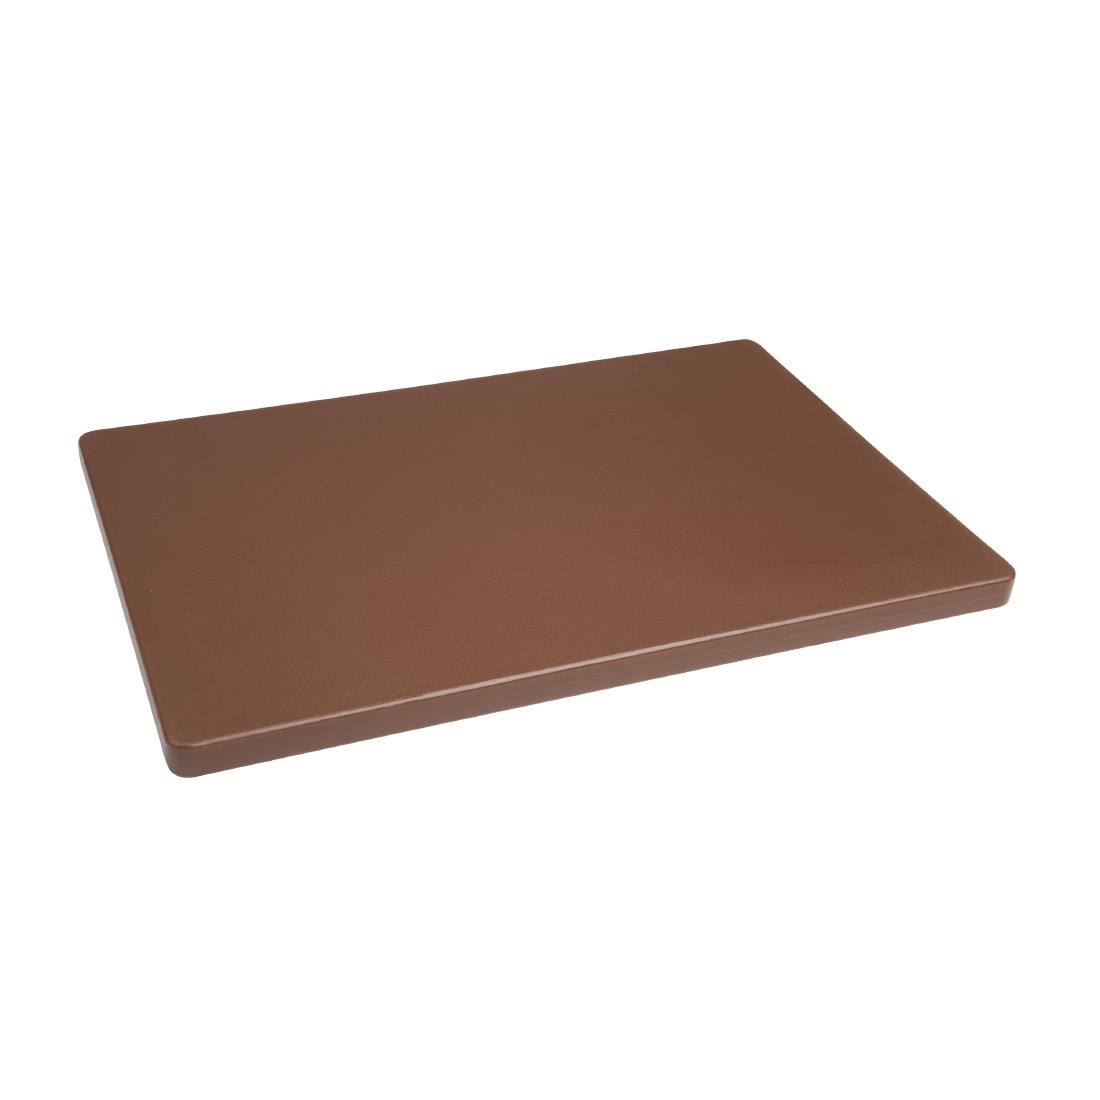 Hygiplas Extra Thick Low Density Brown Chopping Board Standard